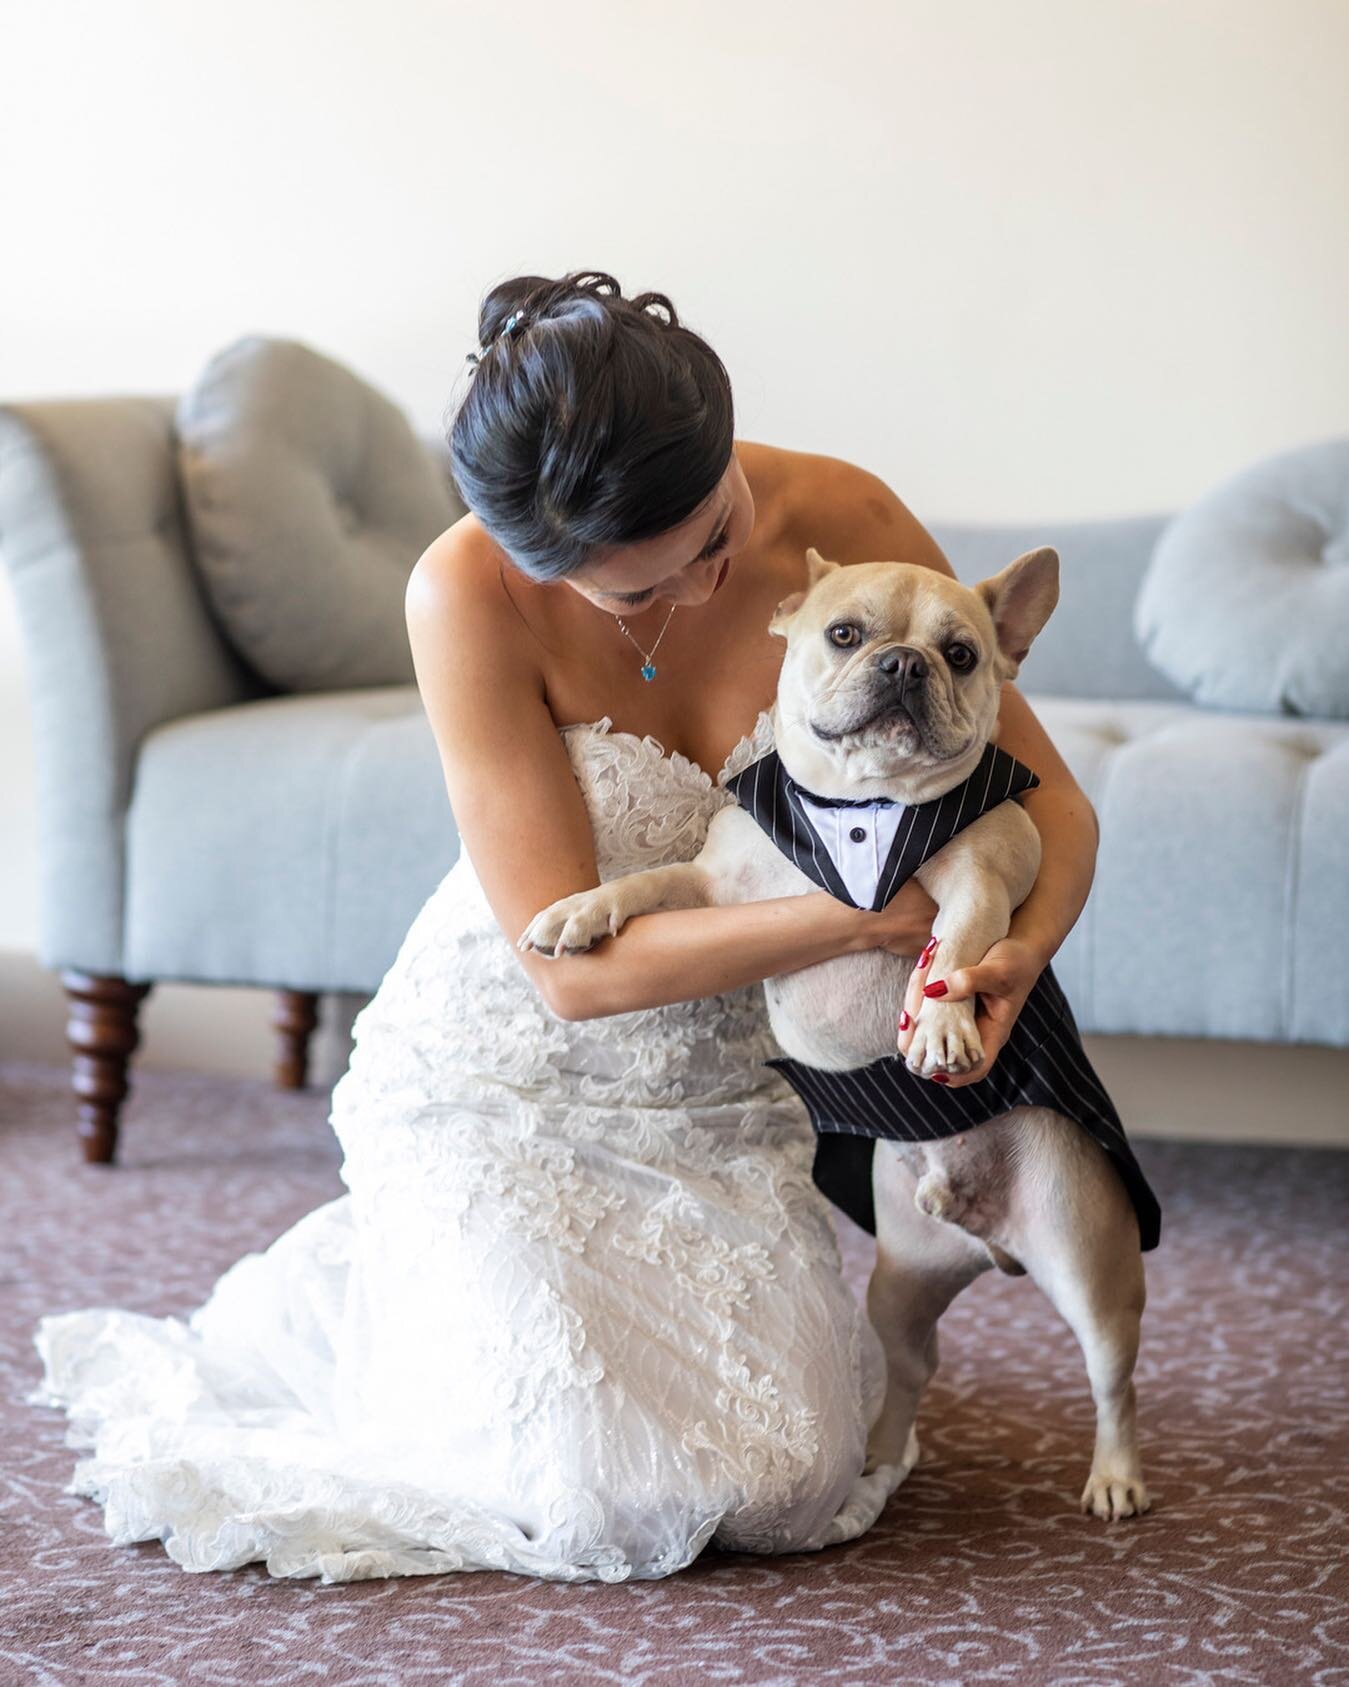 Oh my gah. I mean&hellip;.no words for this right here. If you know me, you know my love for dogs.  This guy looked good on his parents wedding day!
&bull;
&bull;
&bull;
&bull;
&bull;
#weddingday #insideweddings  #weddingphotographer #engagementphoto